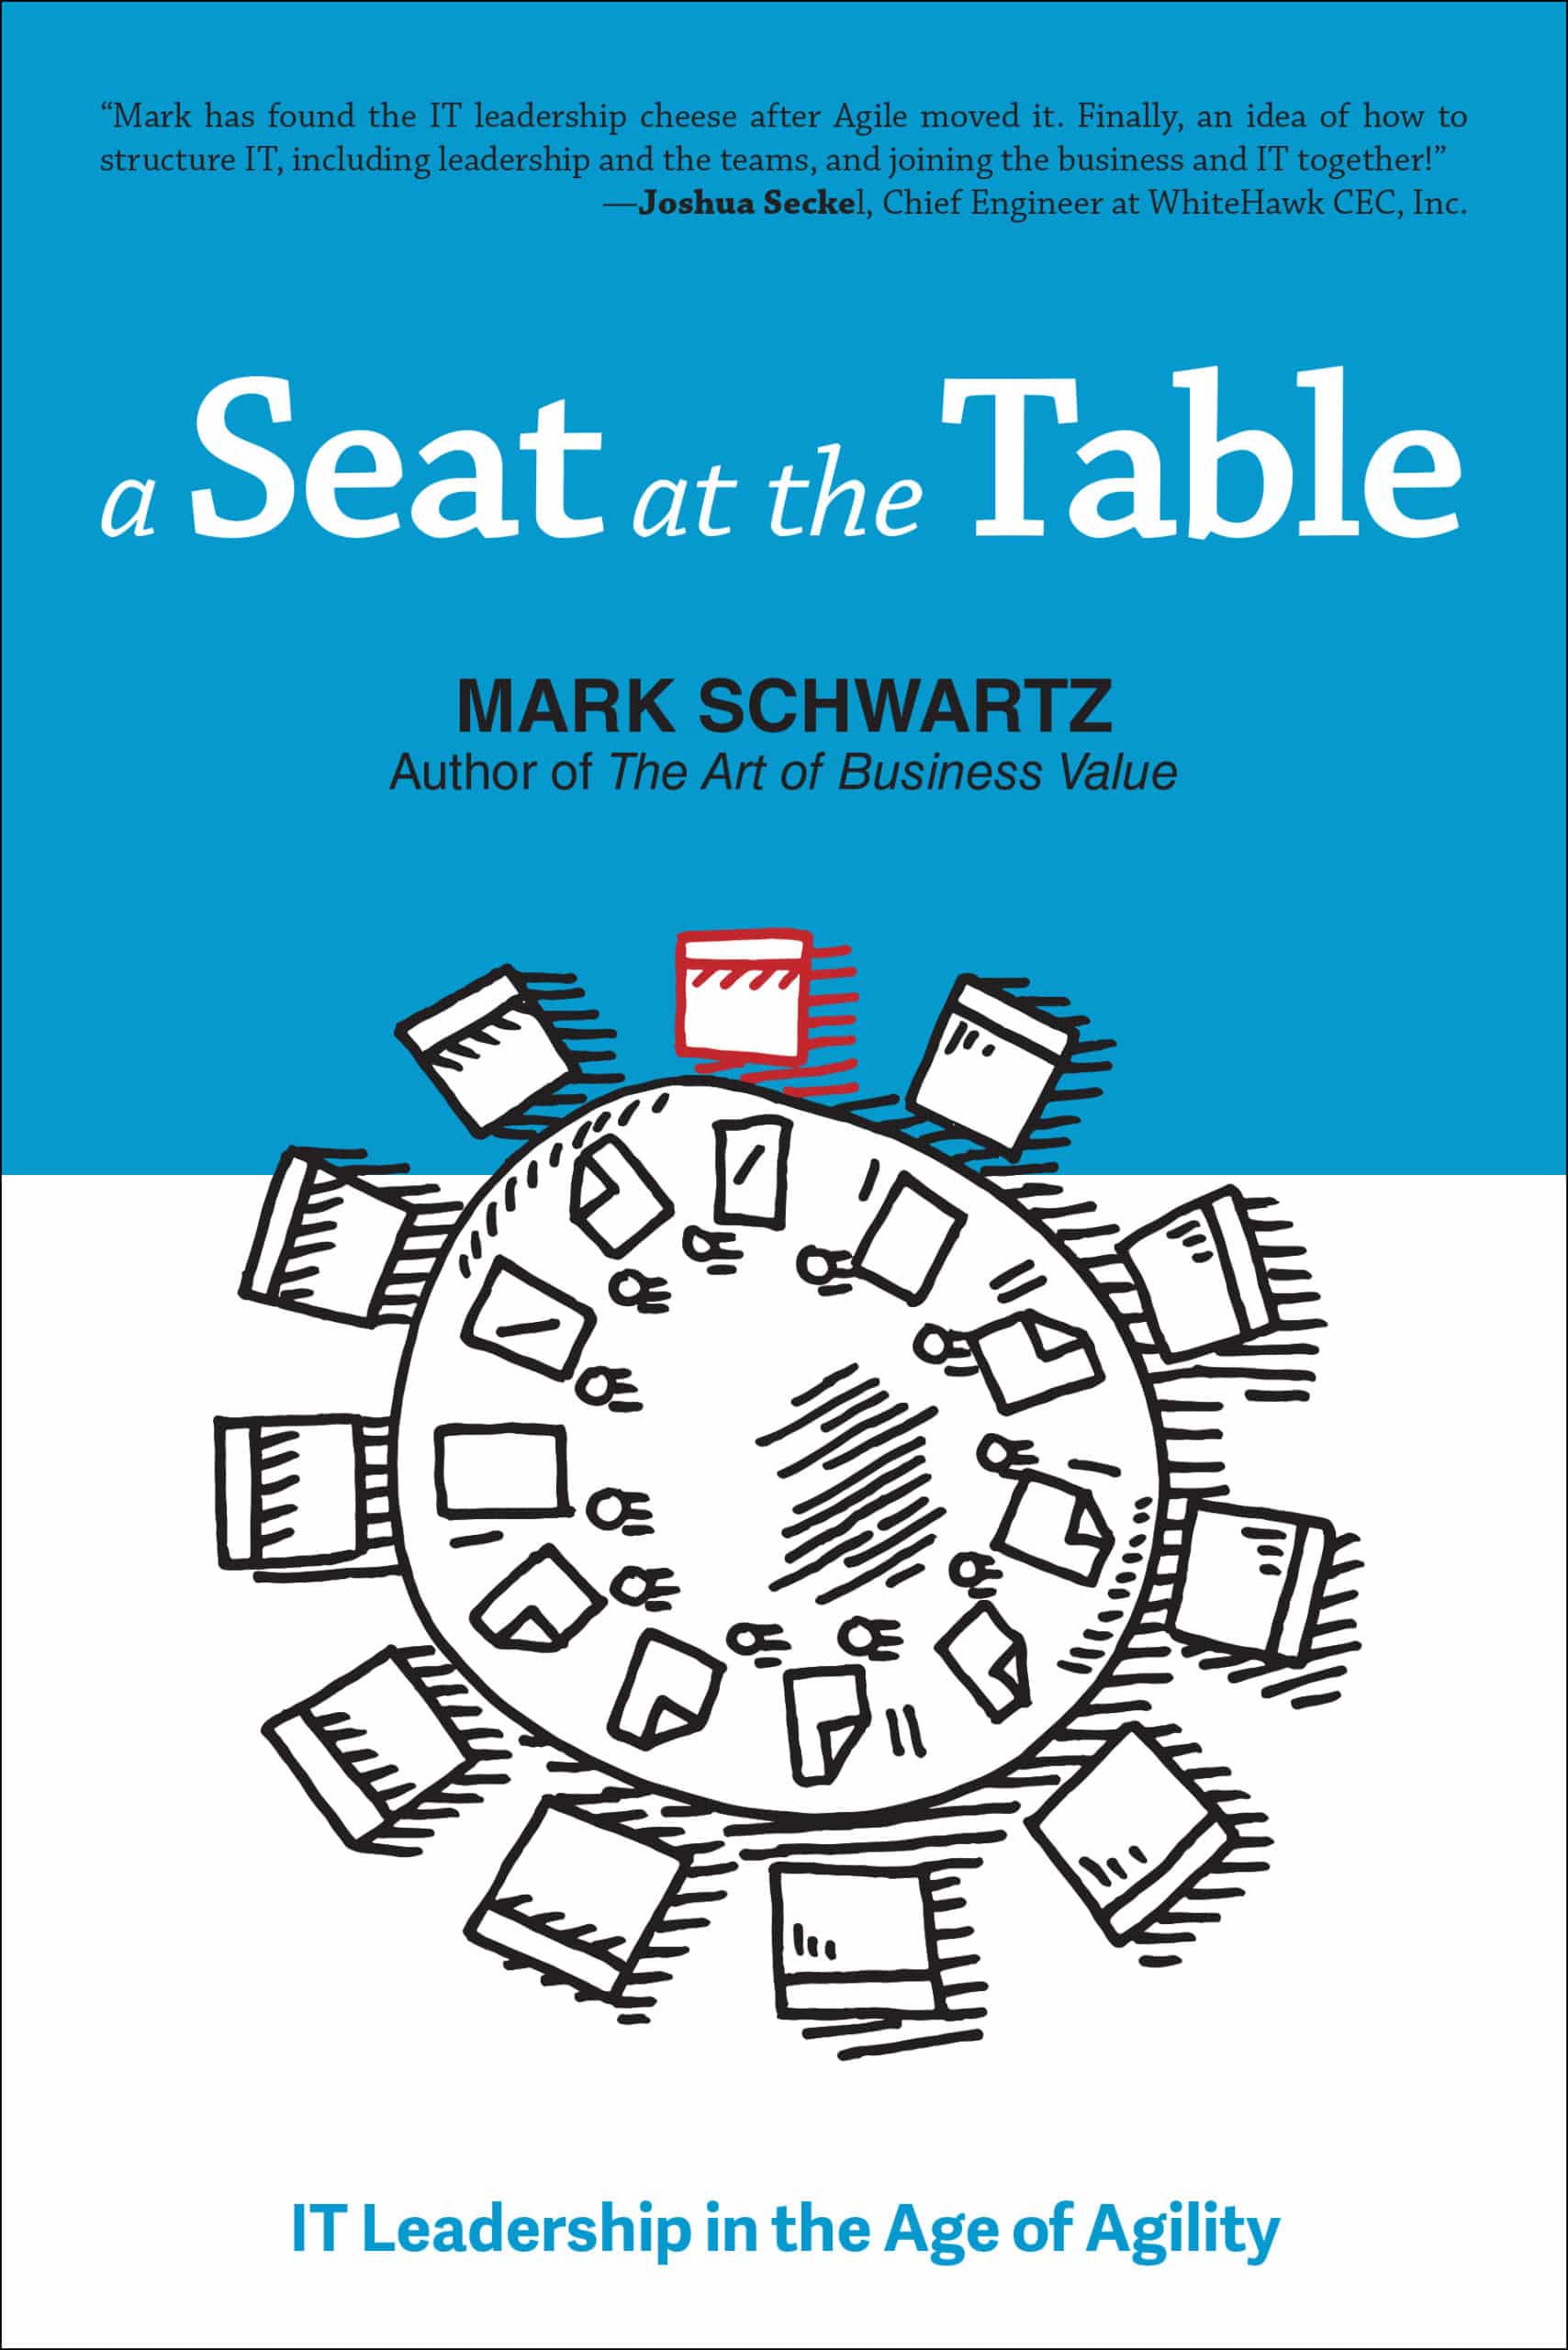 Cover of A Seat at the Table: IT Leadership in the Age of Agility by Mark Schwartz, in which we discuss build versus buy, and why in-house products may be the new norm.